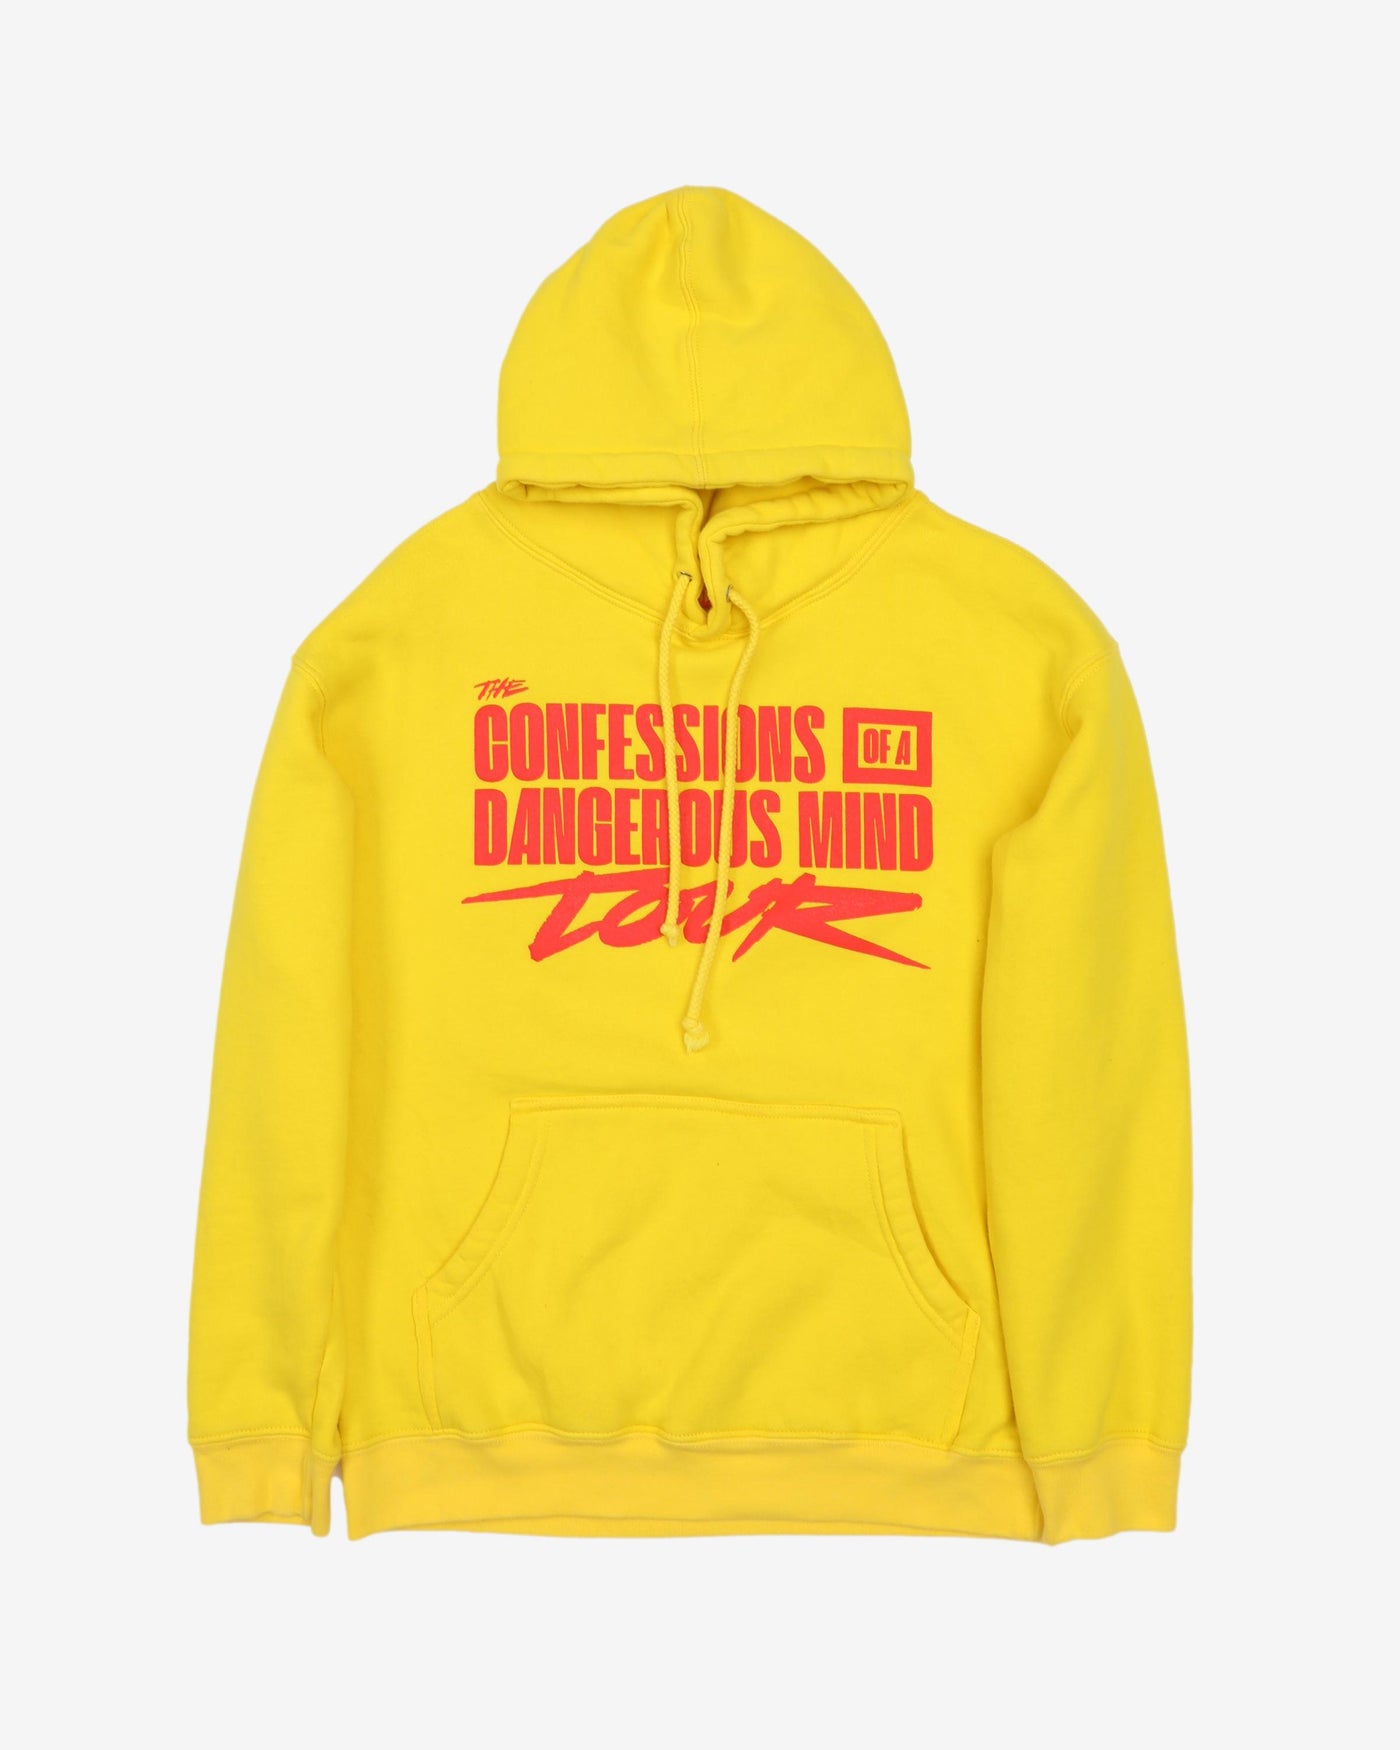 Logic 2019 Confessions Of A Dangerous Mind Yellow Tour Hoodie - S